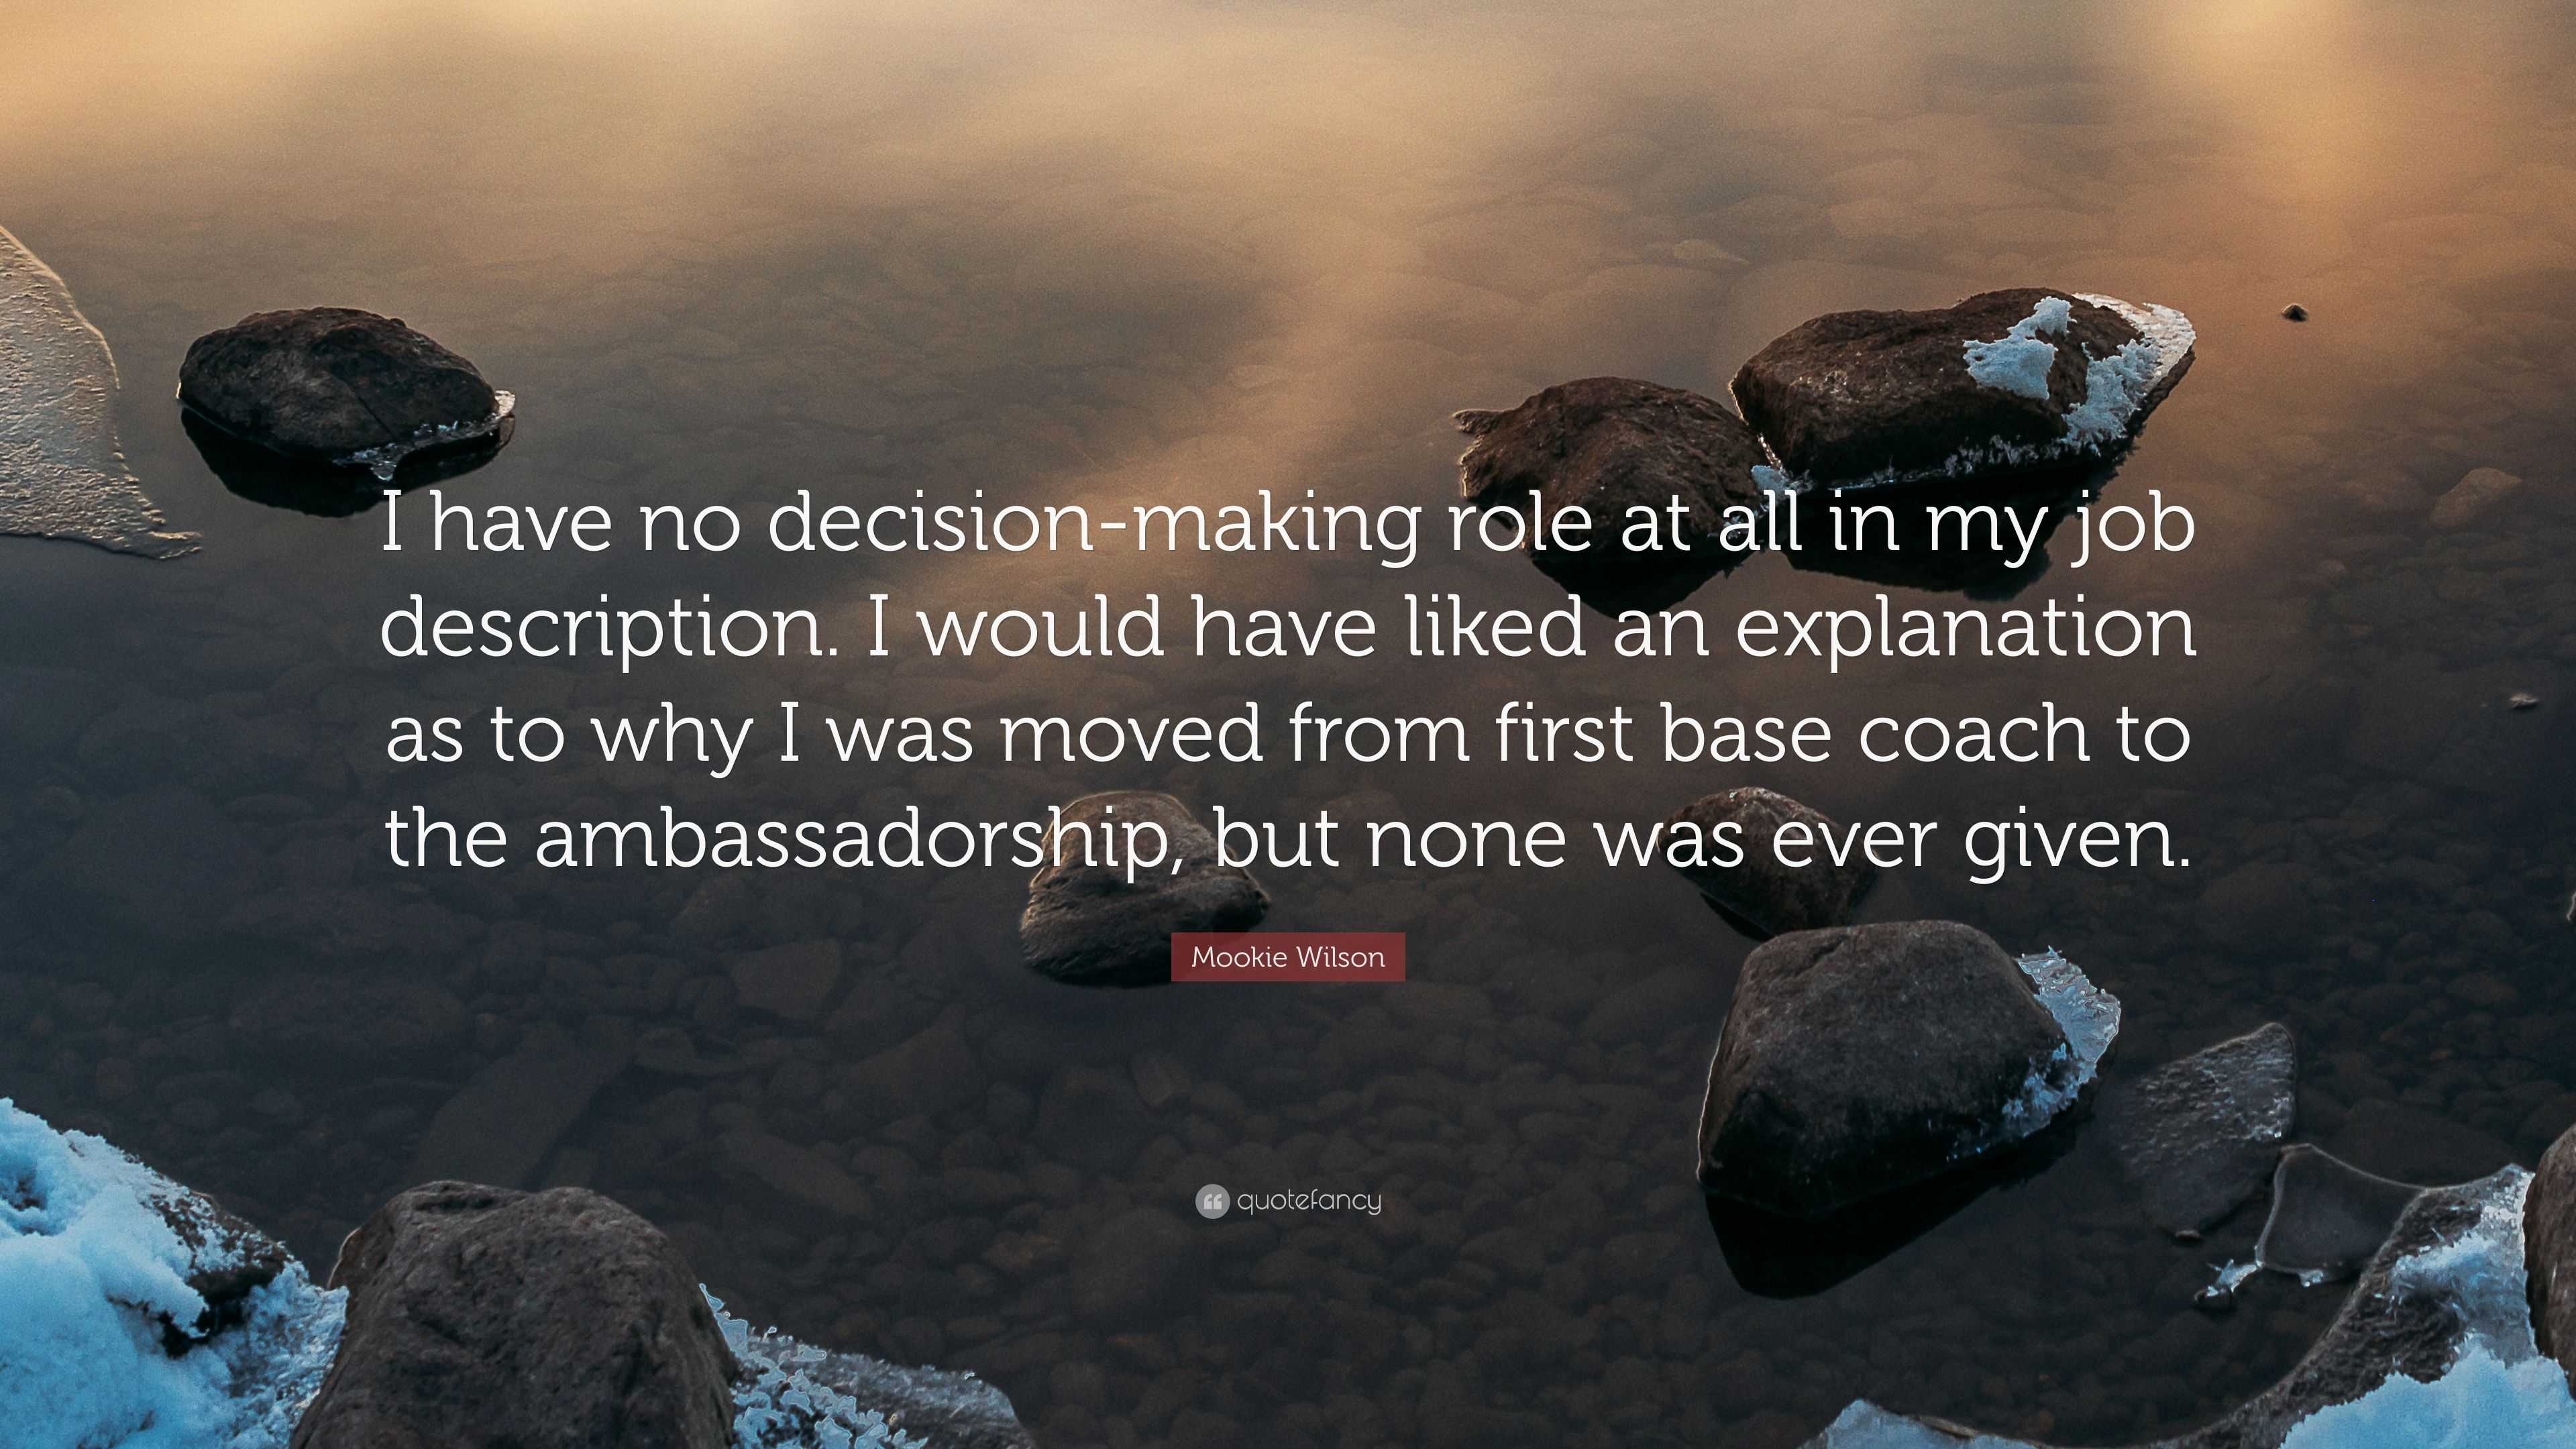 Mookie Wilson Quote: “I have no decision-making role at all in my